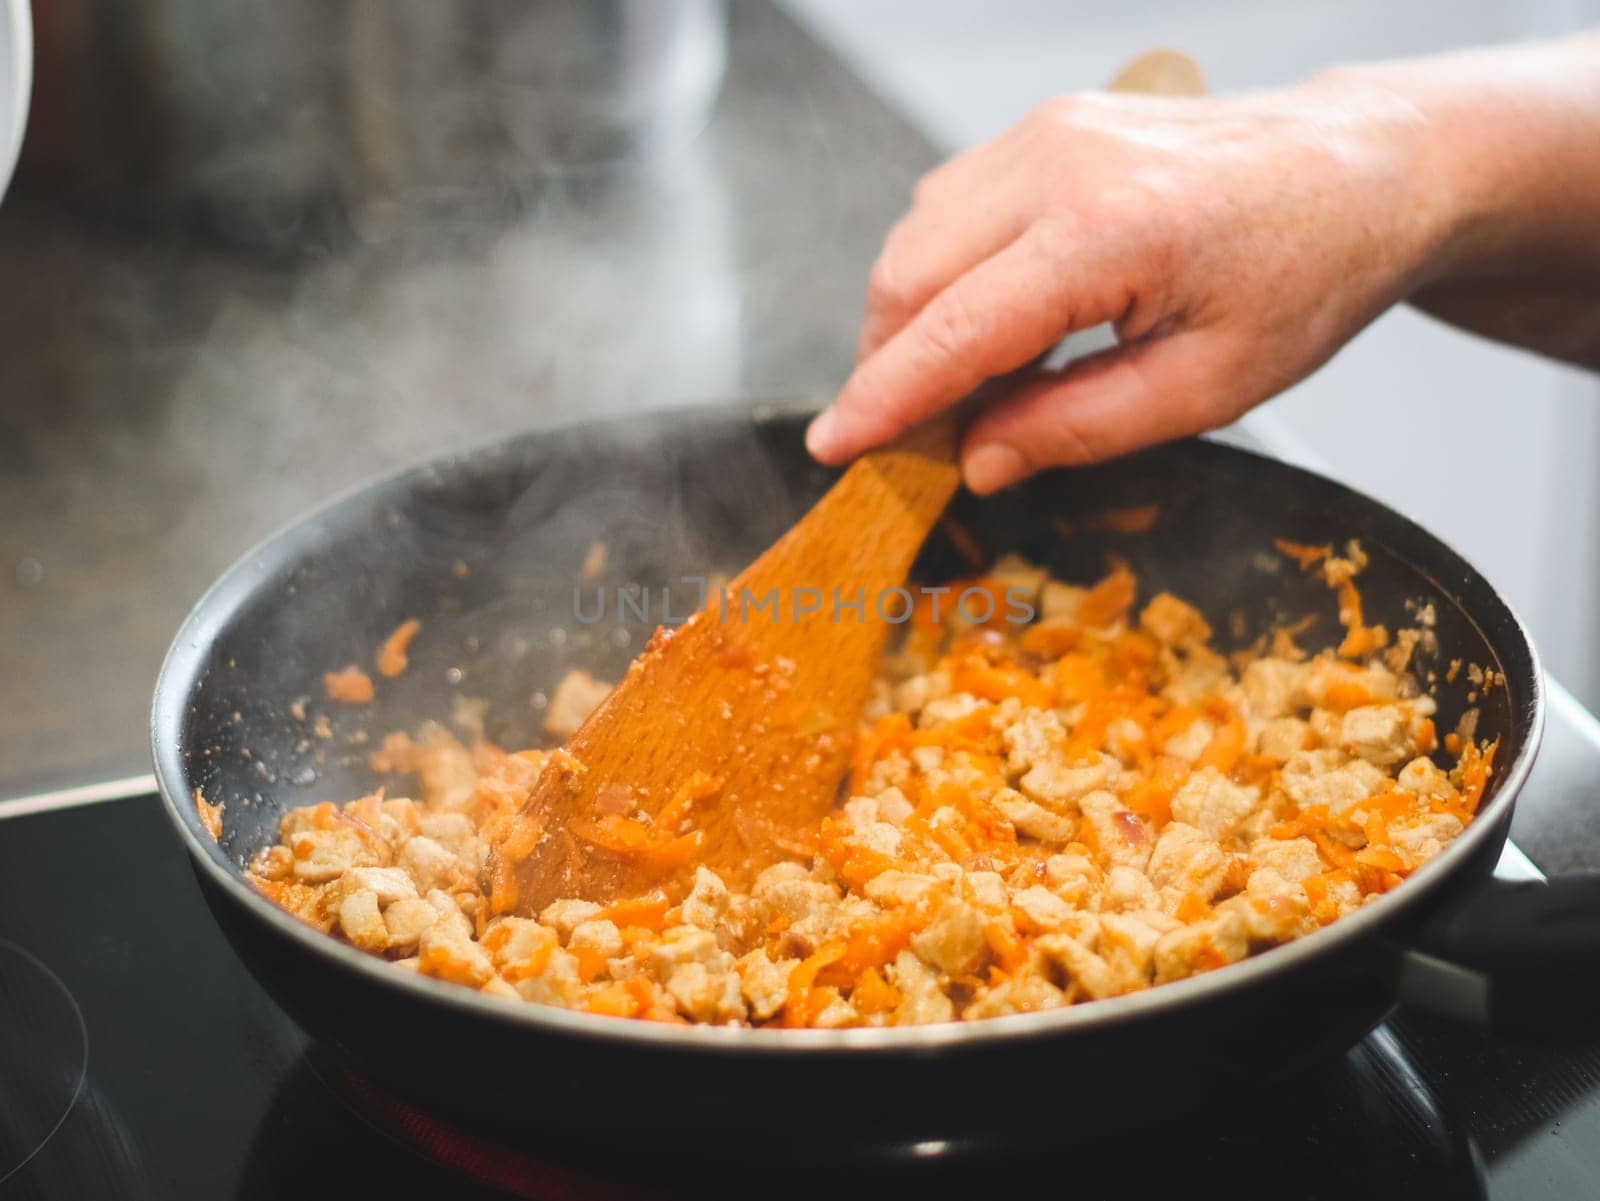 The hand of a senior woman holds a wooden spoon and stirs meat with carrots that are fried in a frying pan on an electric stove, close-up side view. Concept step by step instruction, cooking home, traditional recipes, national cuisine, cabbage rolls, dolma.